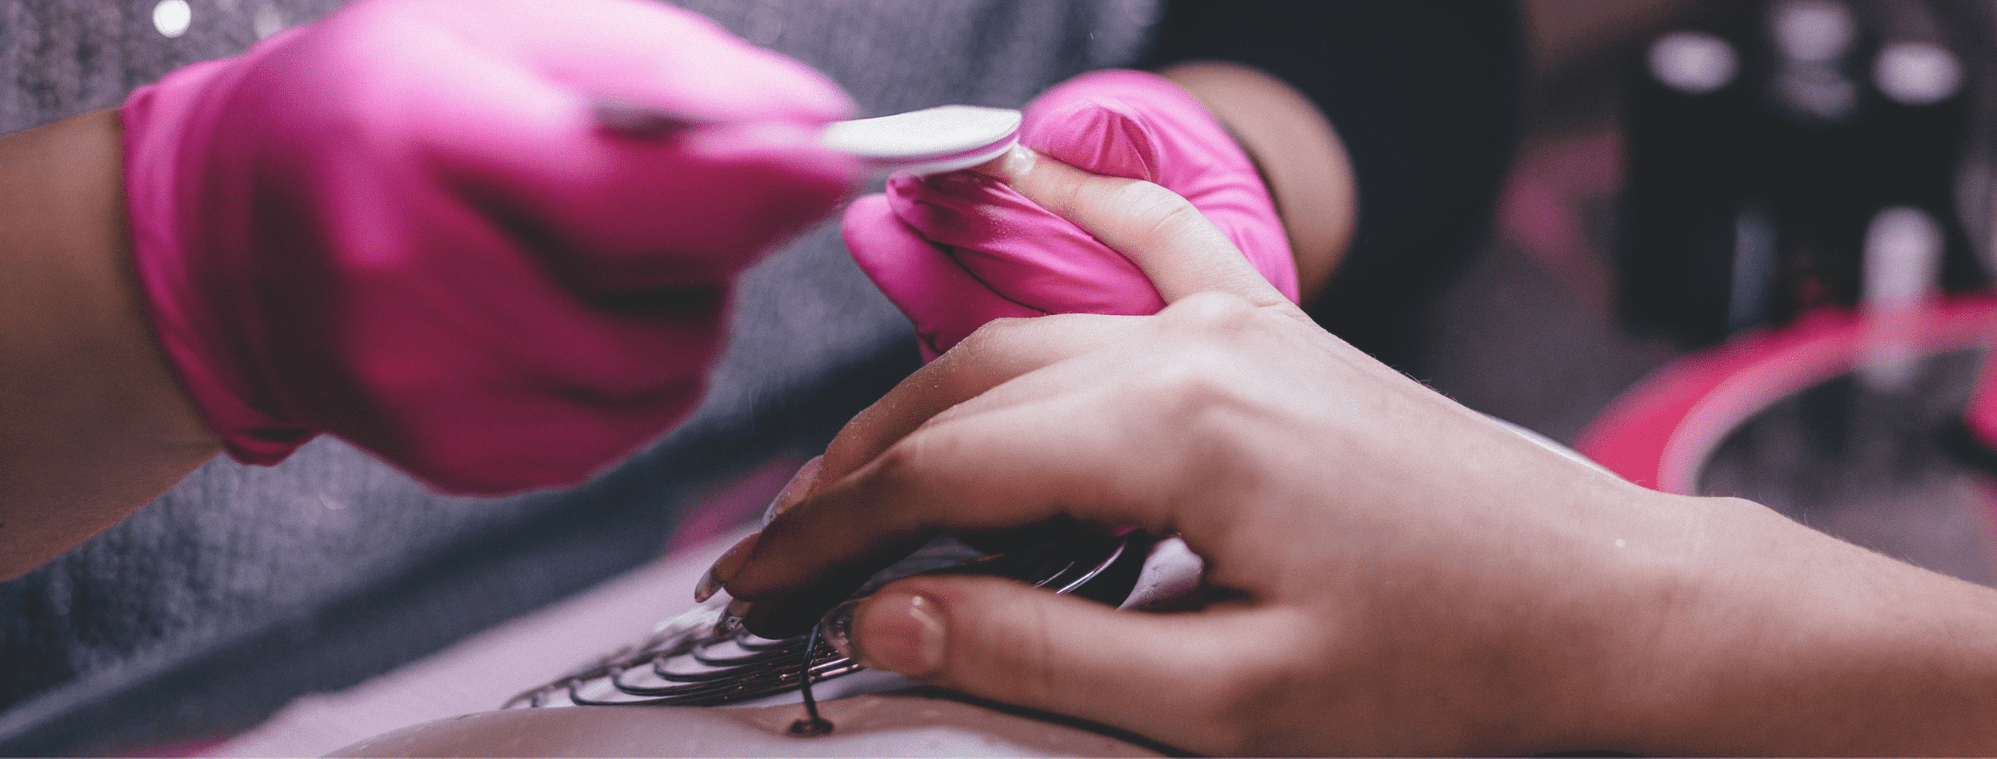 How Long Does It Take To Become A Nail Technician?